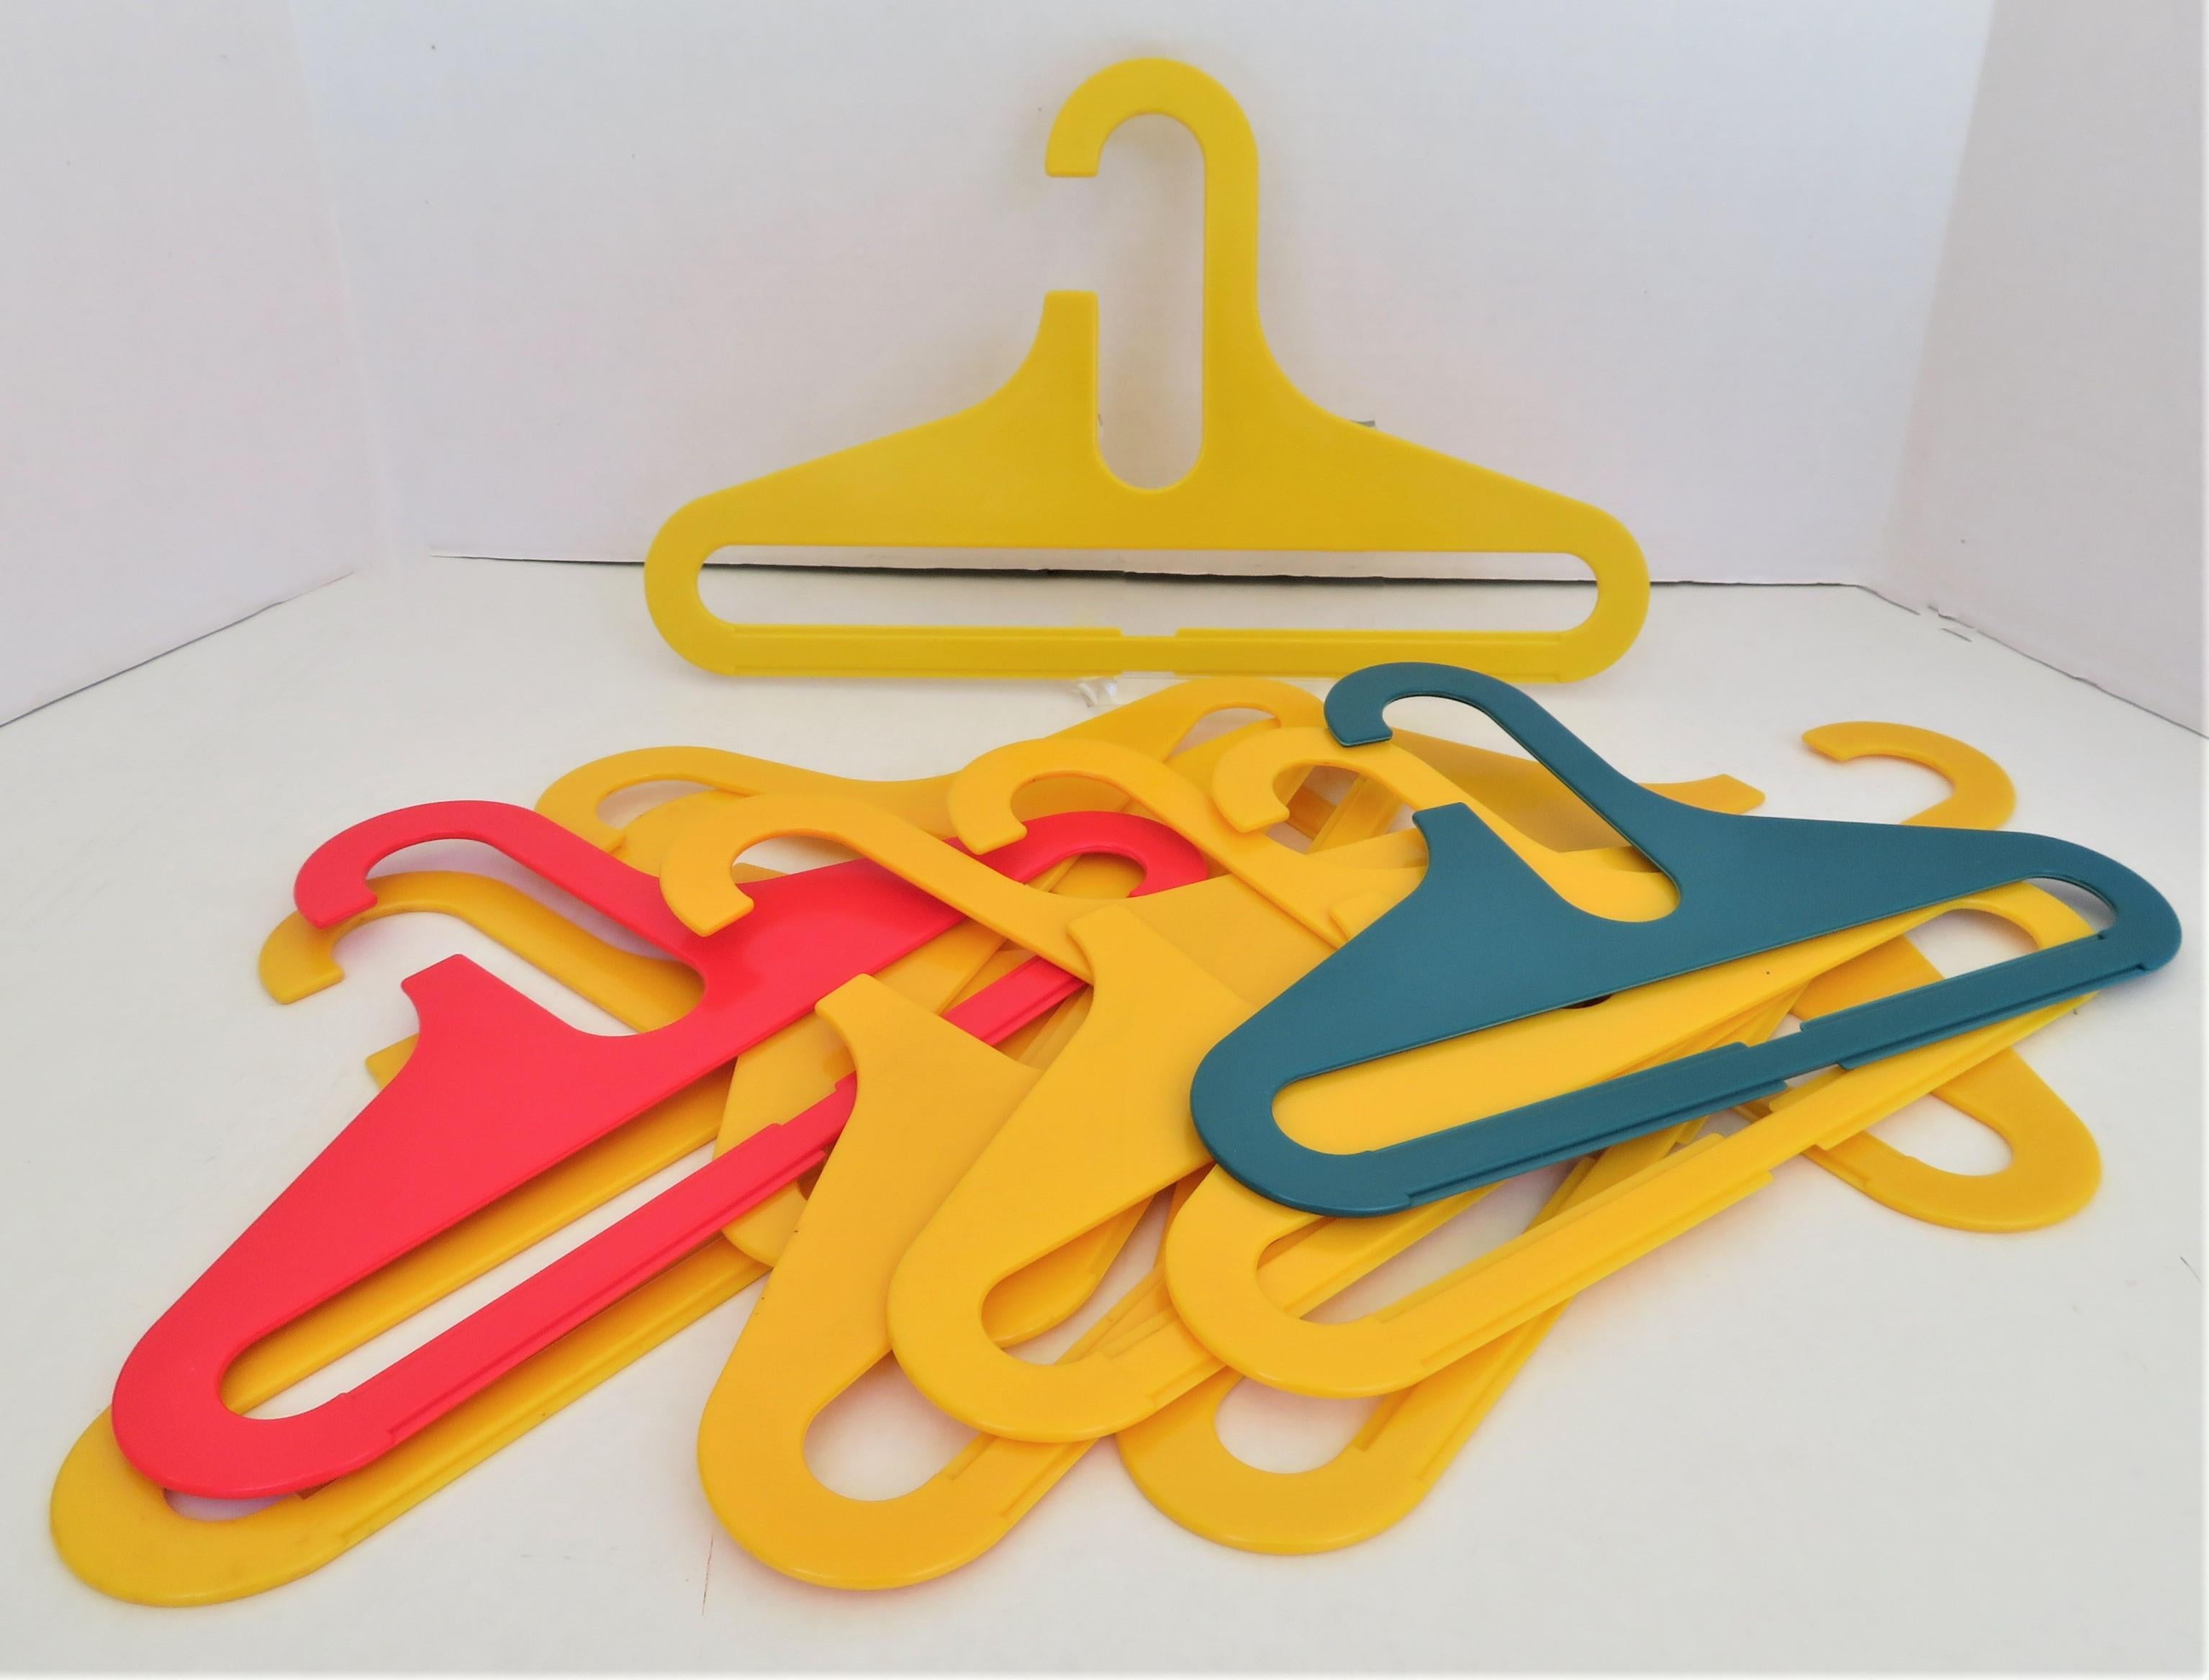 From the 1970s in the style of Ingo Maurer’s Op Pop FLAIR colorful heavy plastic clothes hangers. A set of 11 colorful plastic hangers for children clothing, 10 of the same size, 12 1/2 inches wide, and one a bit wider in yellow, 14 1/2 inches wide.